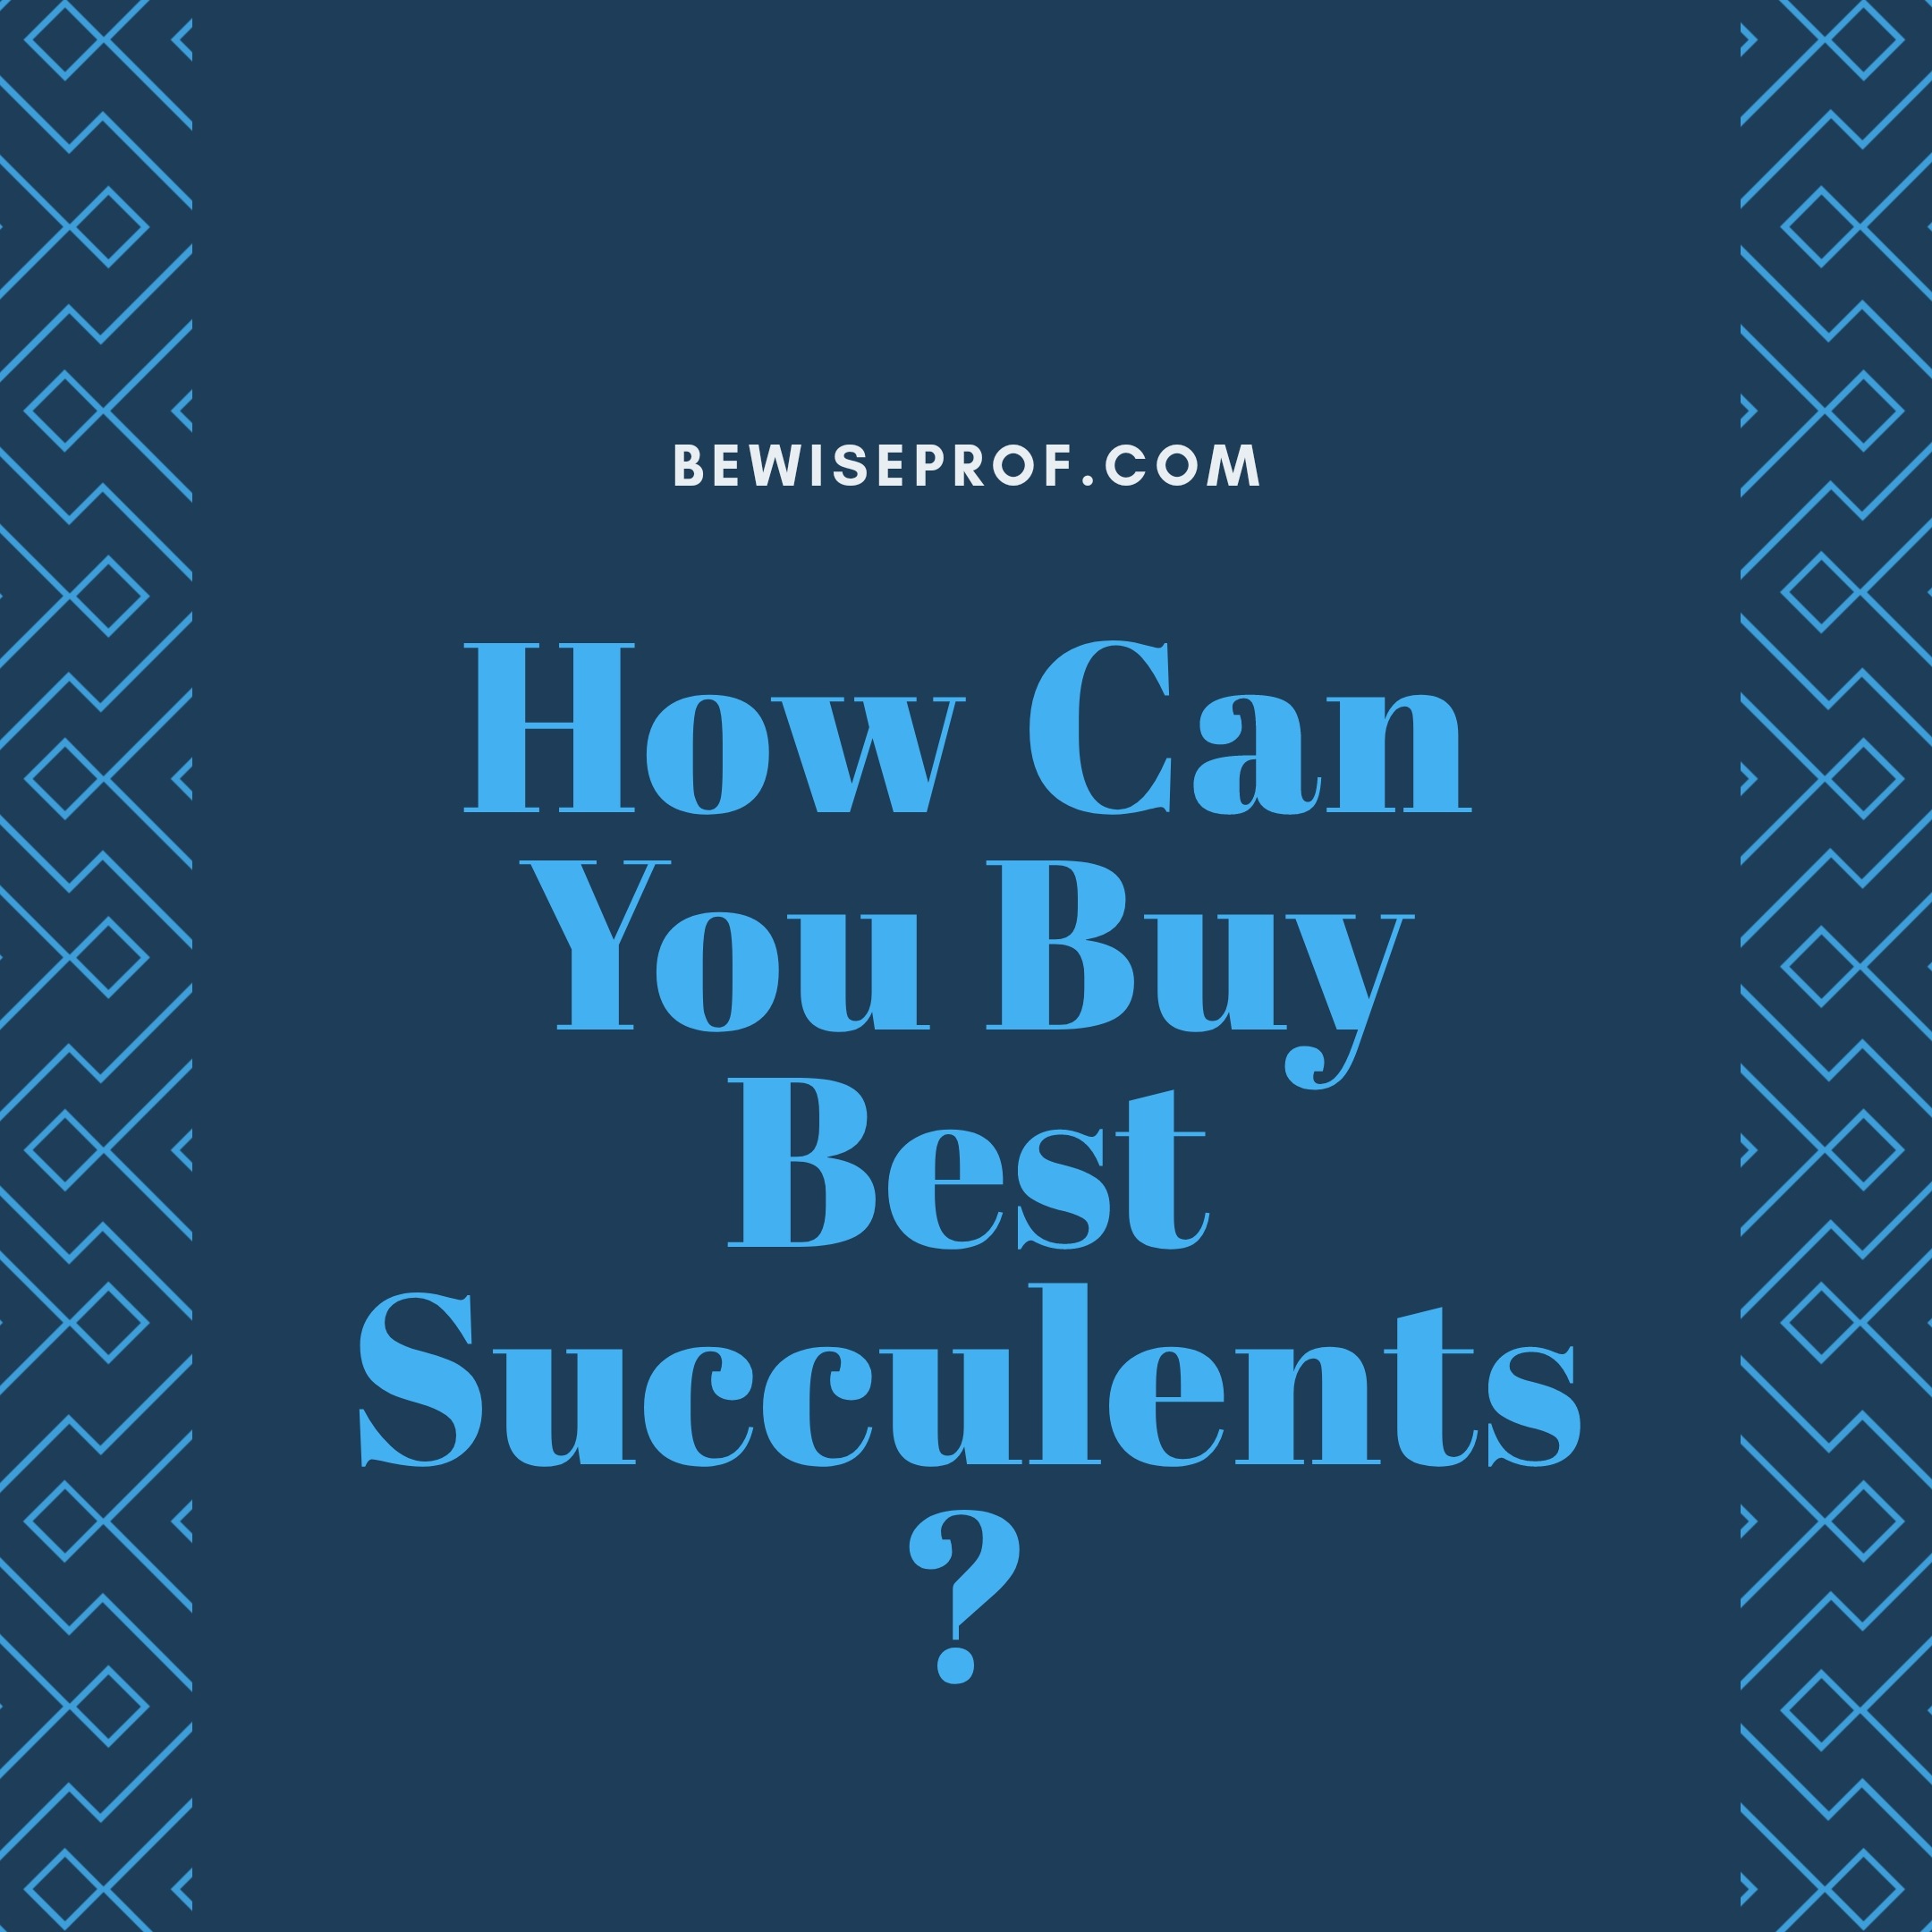 How Can You Buy Best Succulents?